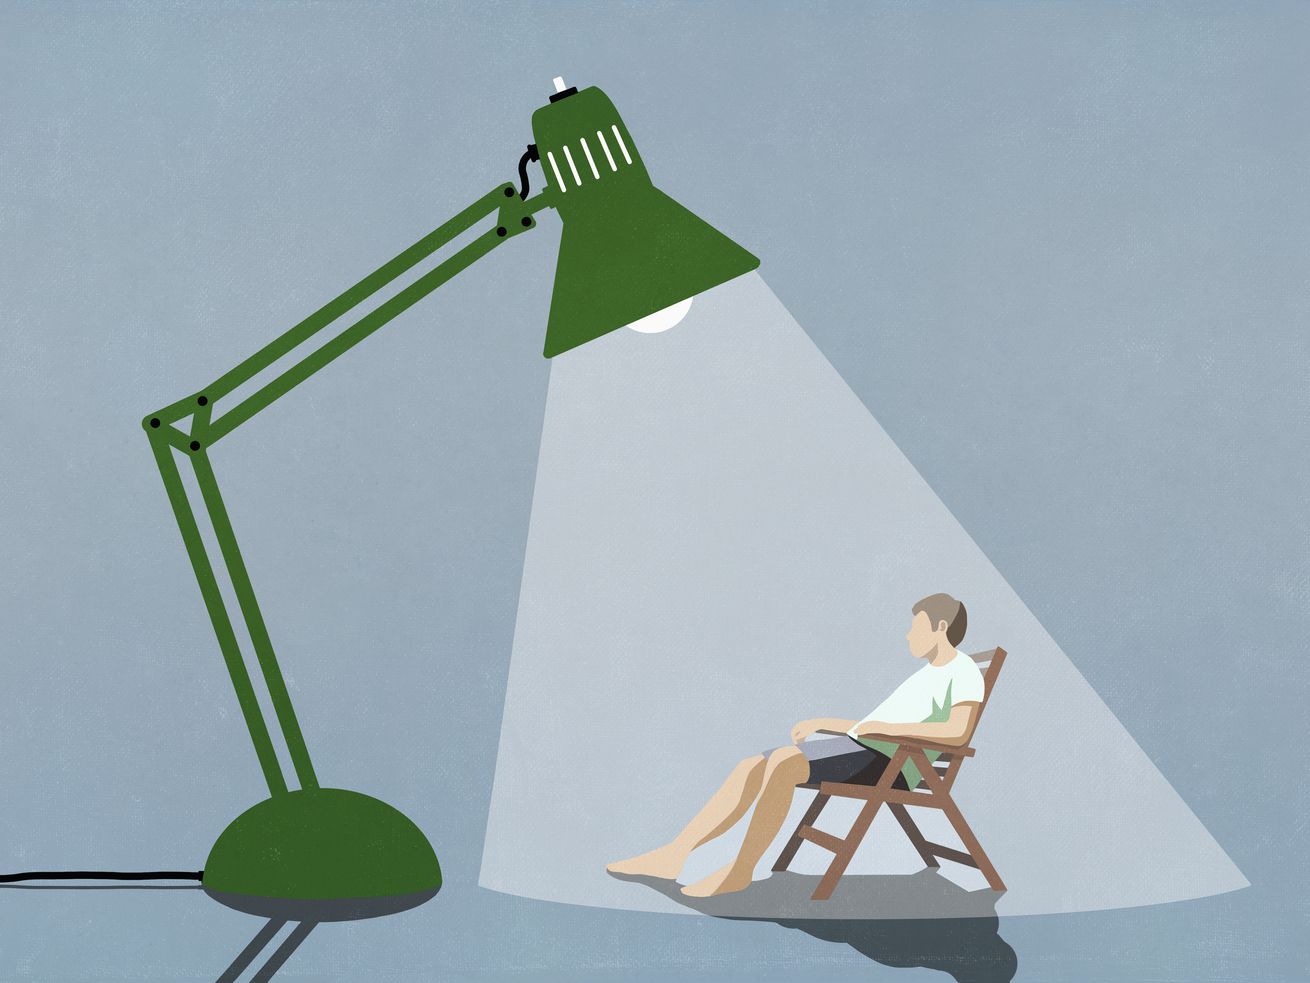 An illustration of a man sitting in a beach chair basking in the light under a giant green articulated desk lamp.